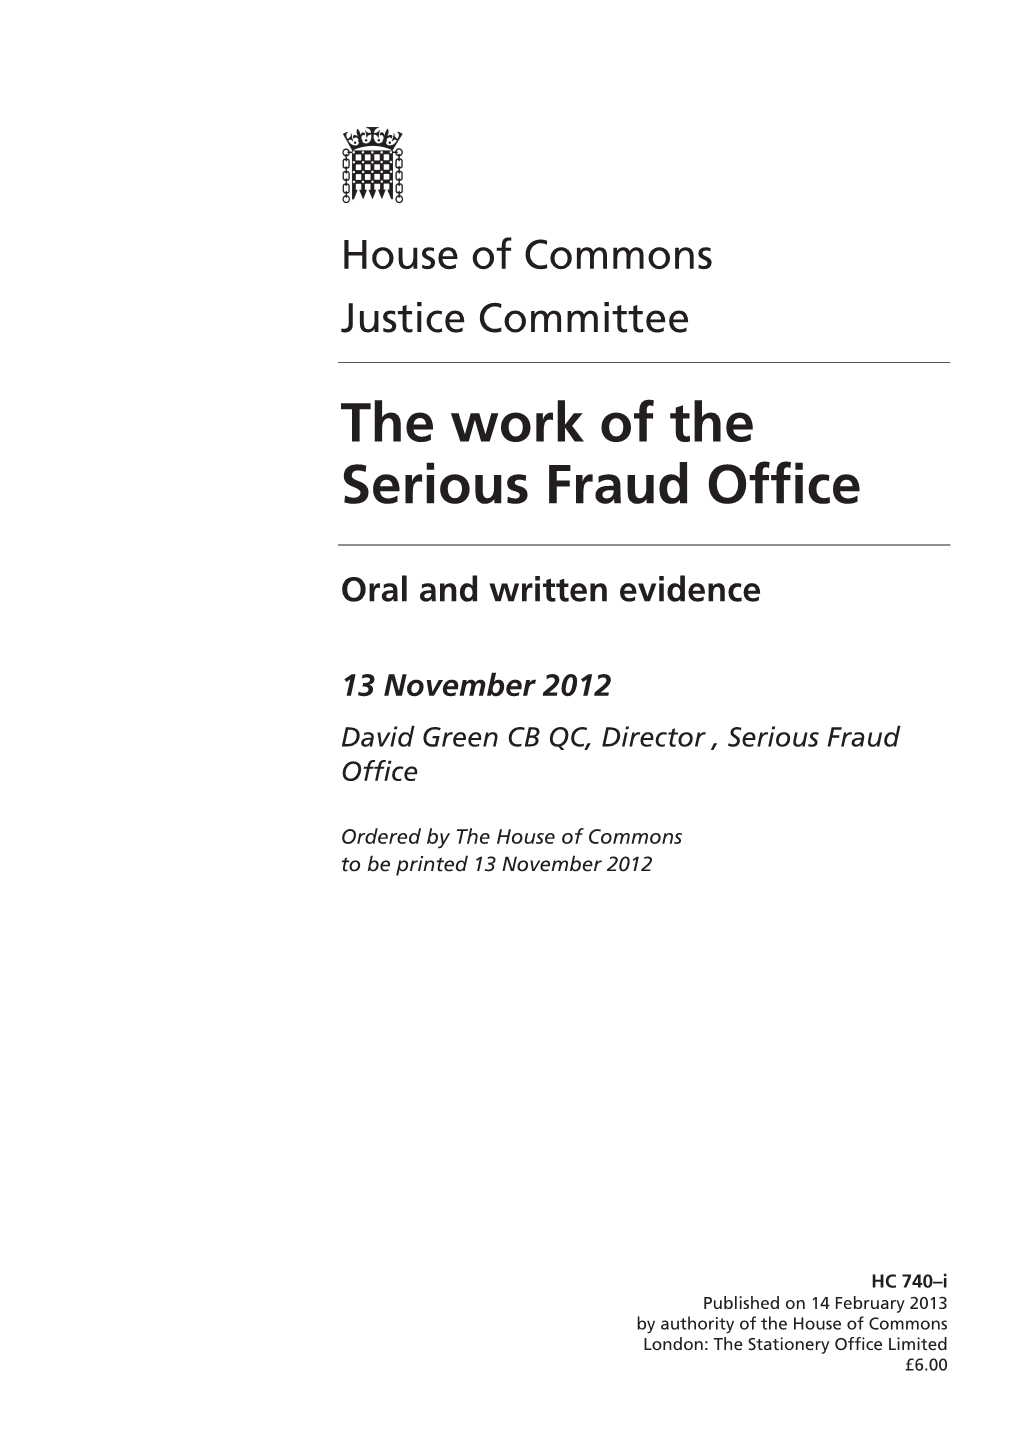 The Work of the Serious Fraud Office